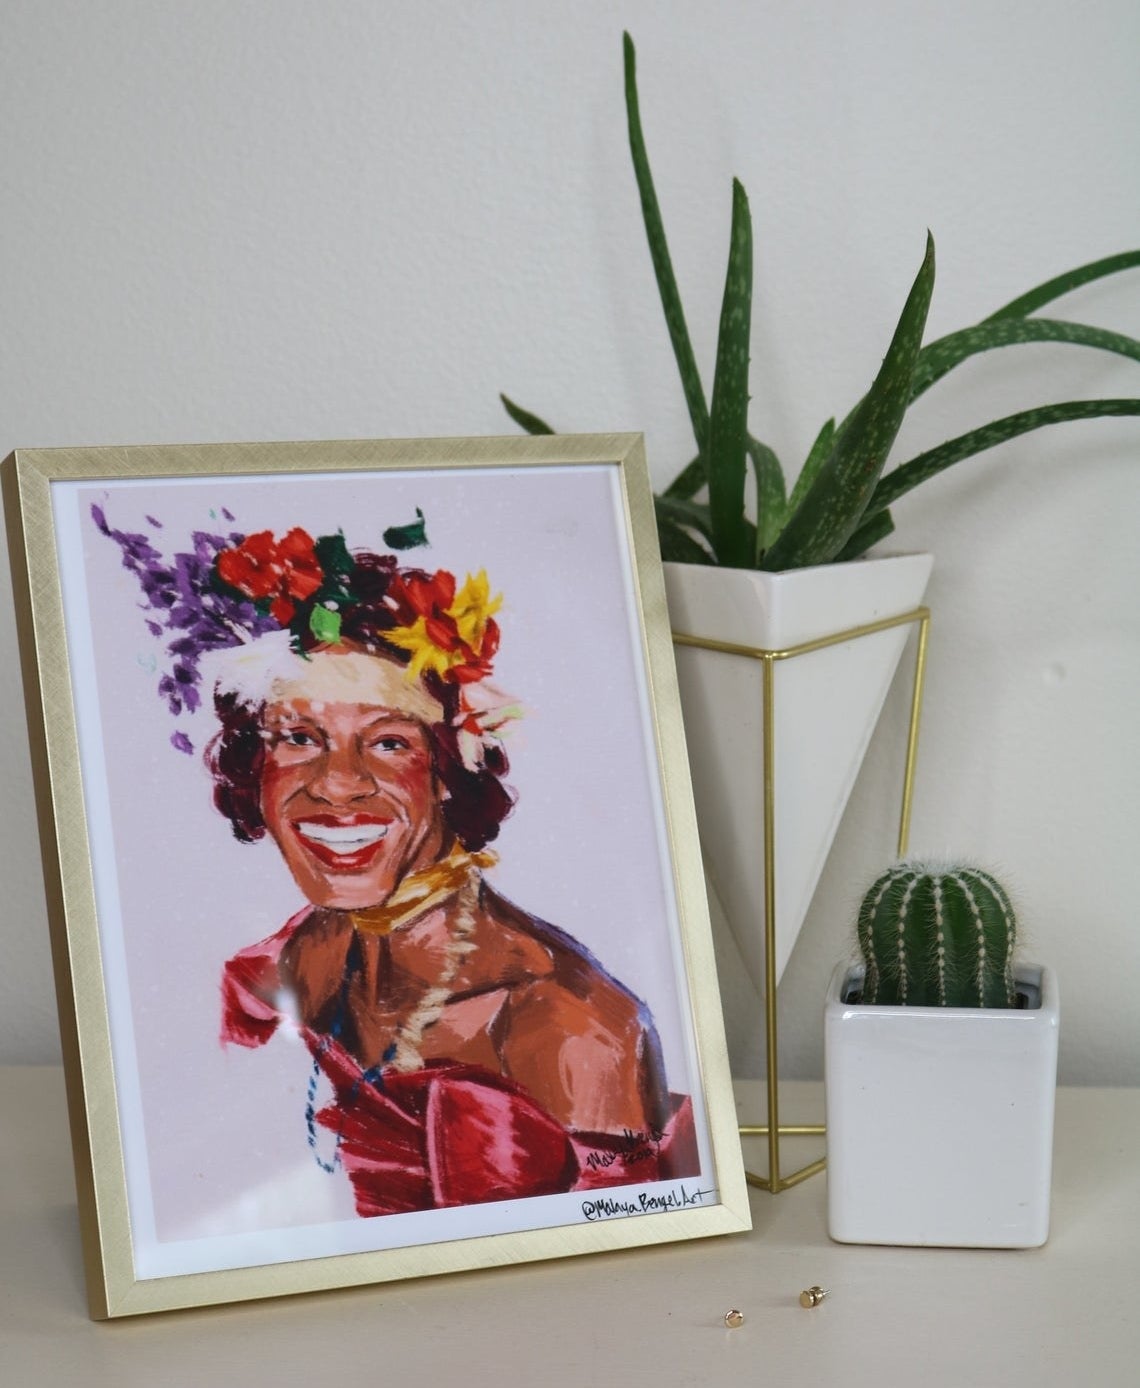 A colorful painted print of Marsha P. Johnson wearing an evening gown, flower crown, and showing off her dazzling smile 